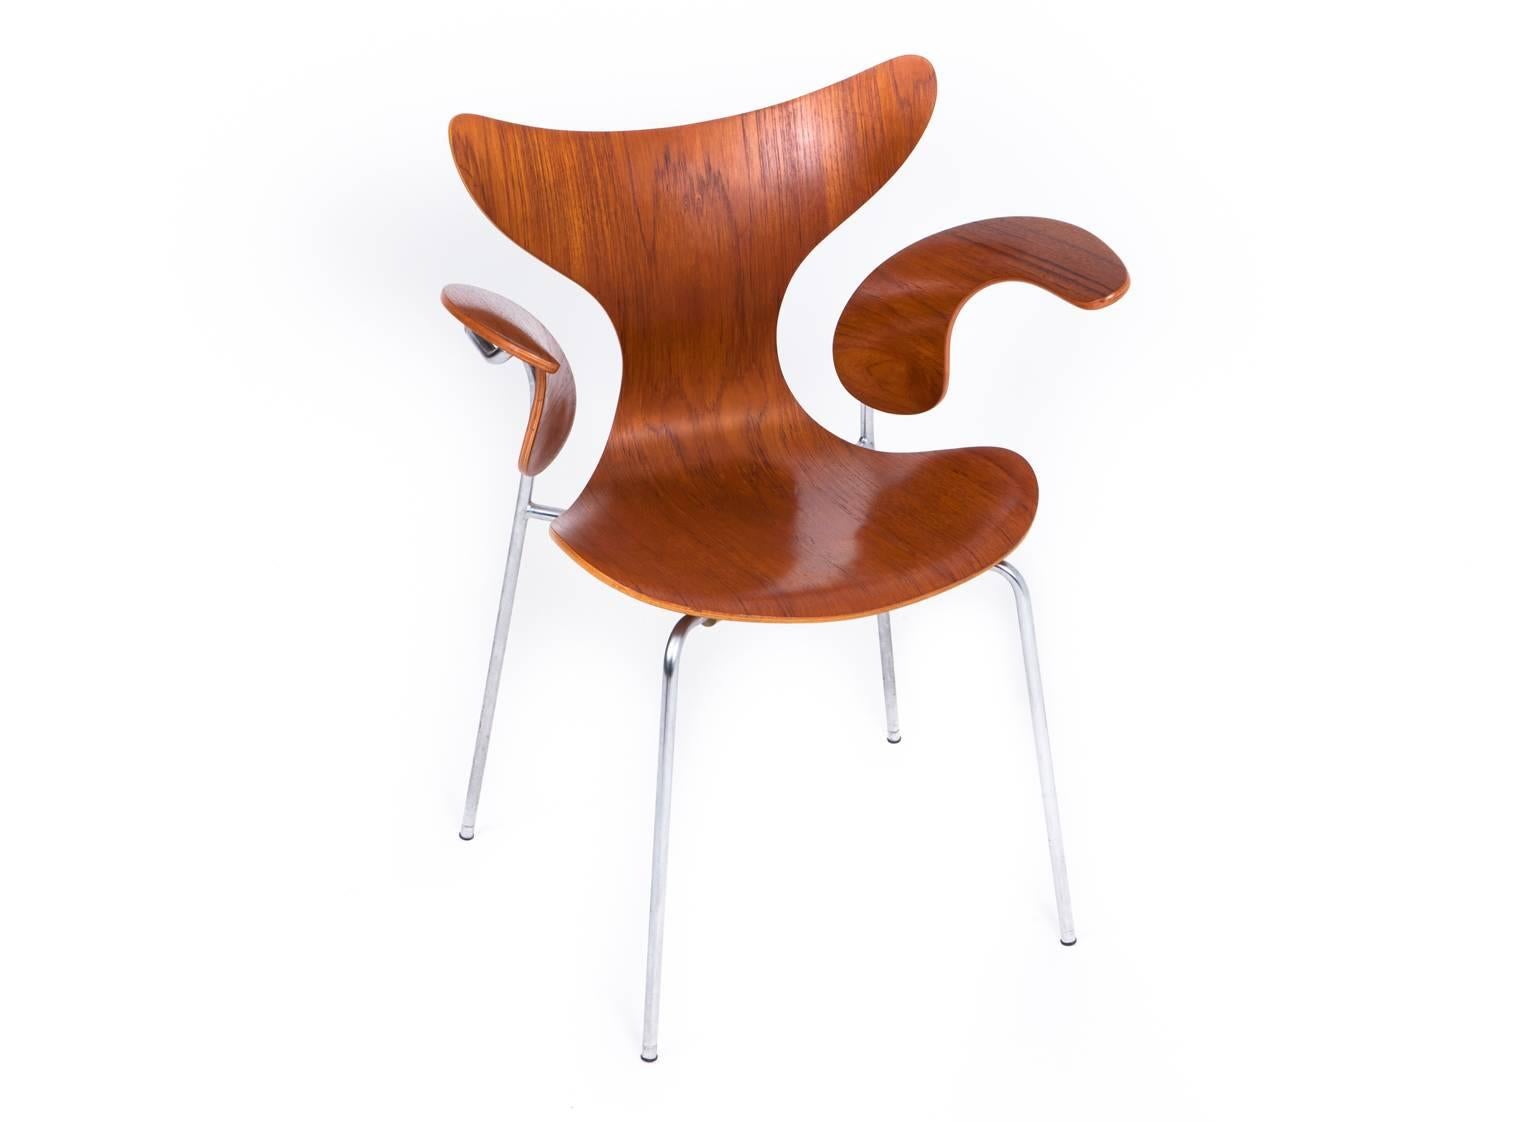 Arne Jacobsen

The Seagull chair model 3208

Rare set of 12 Seagull chairs in teak.

Designed for the Danish National Bank in 1968
Produced by Fritz Hansen

(Sold as set of 6 - 8 - 12).